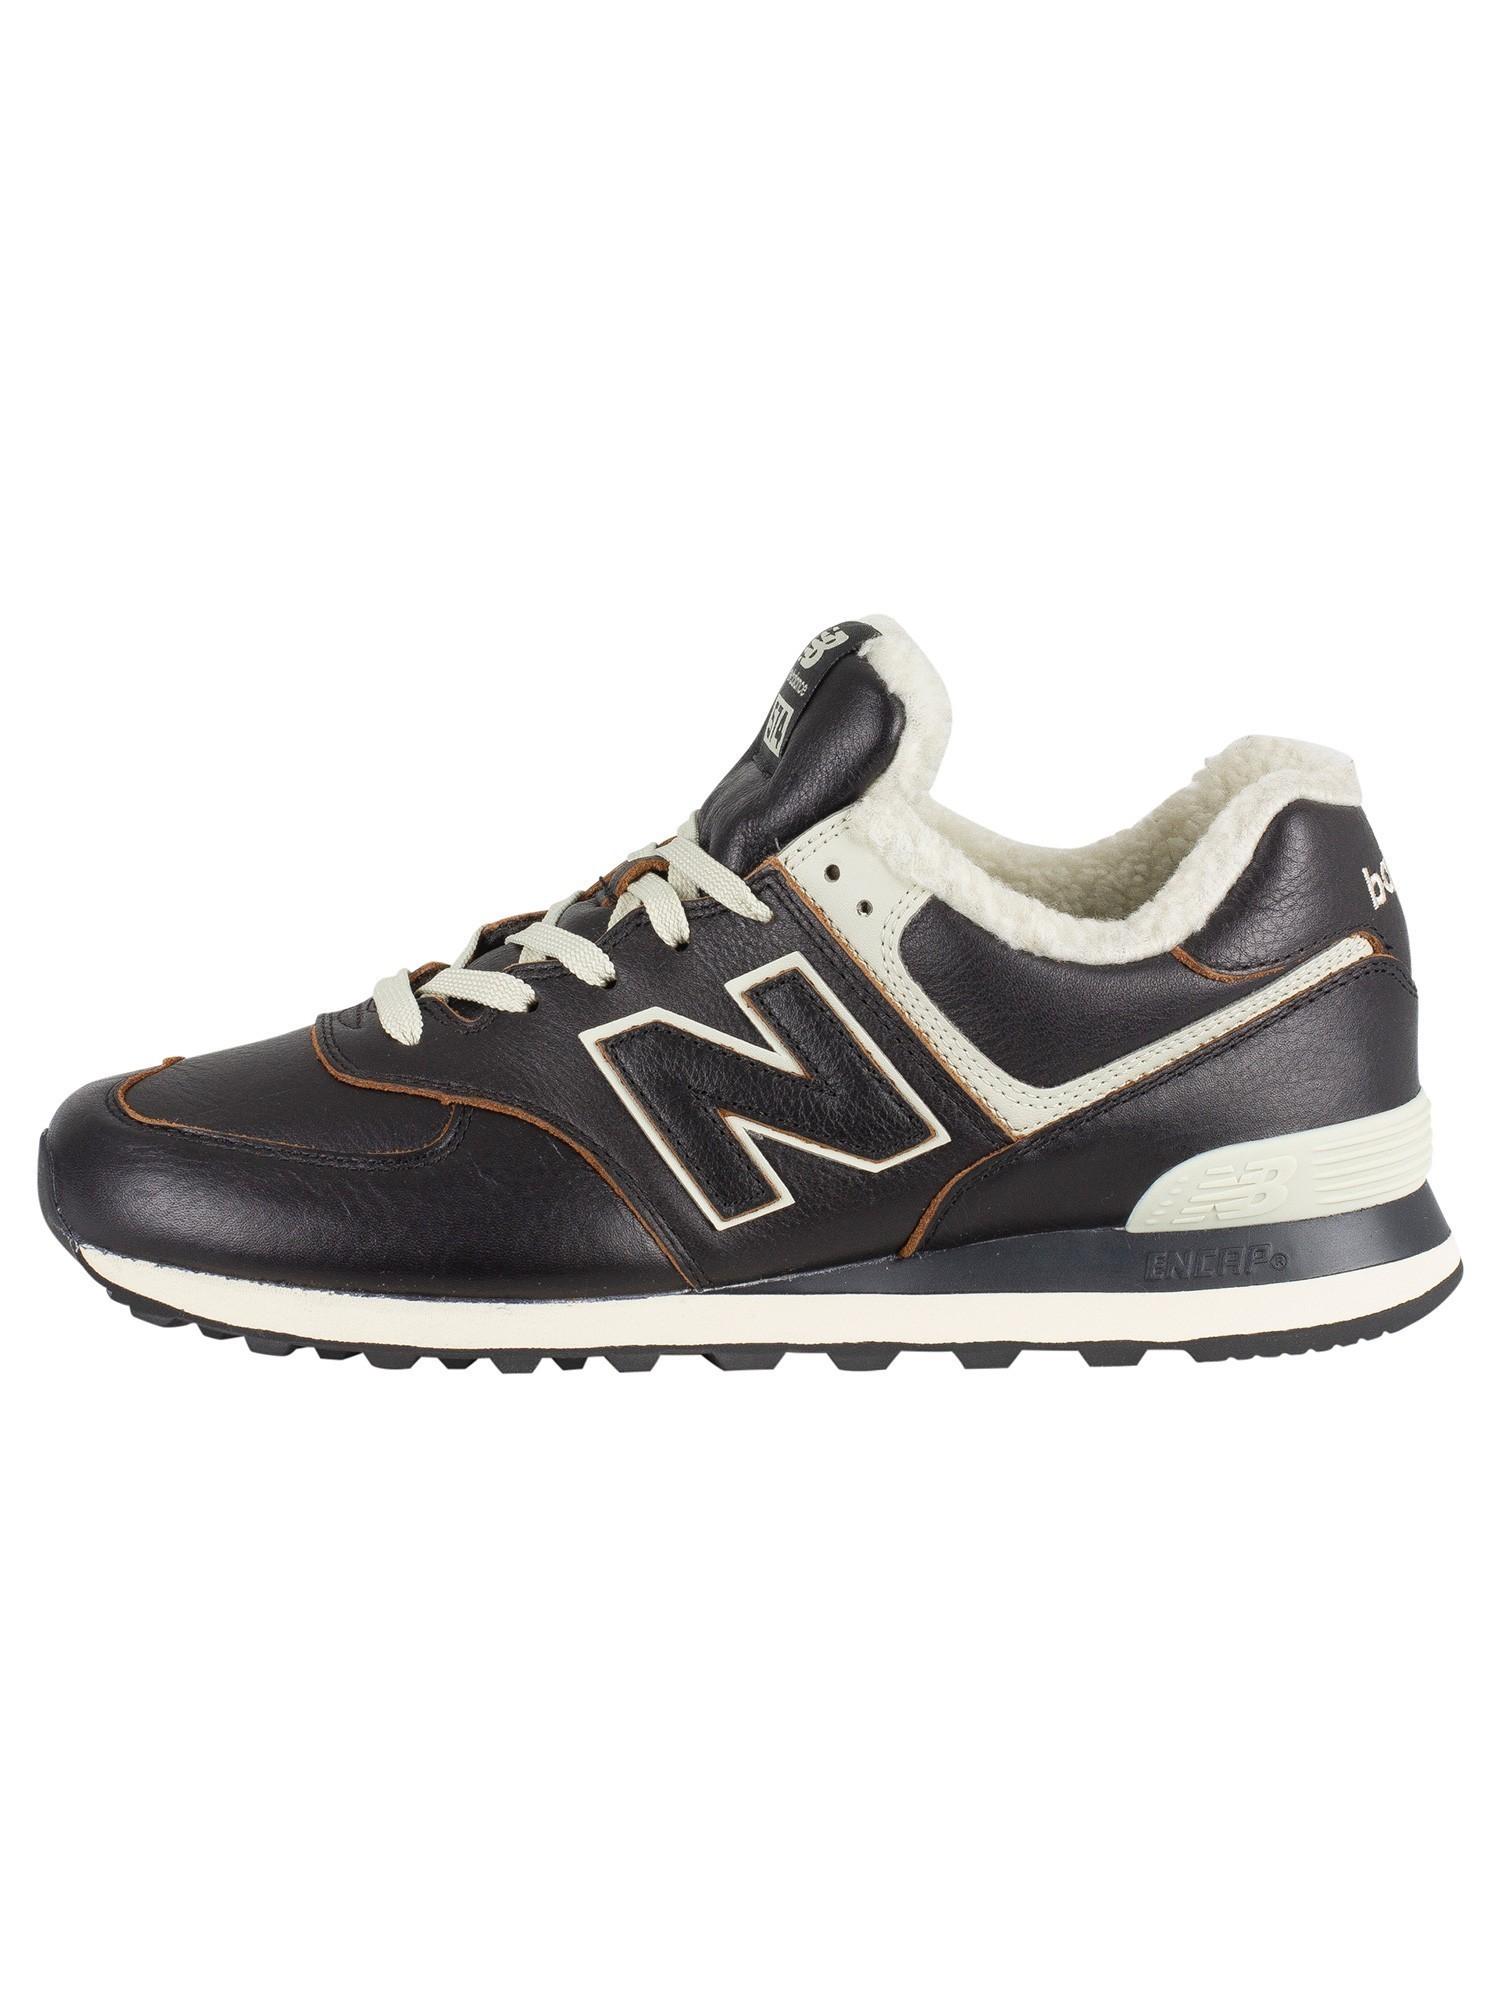 New Balance 574 Leather Sherpa Trainers in Black for Men | Lyst